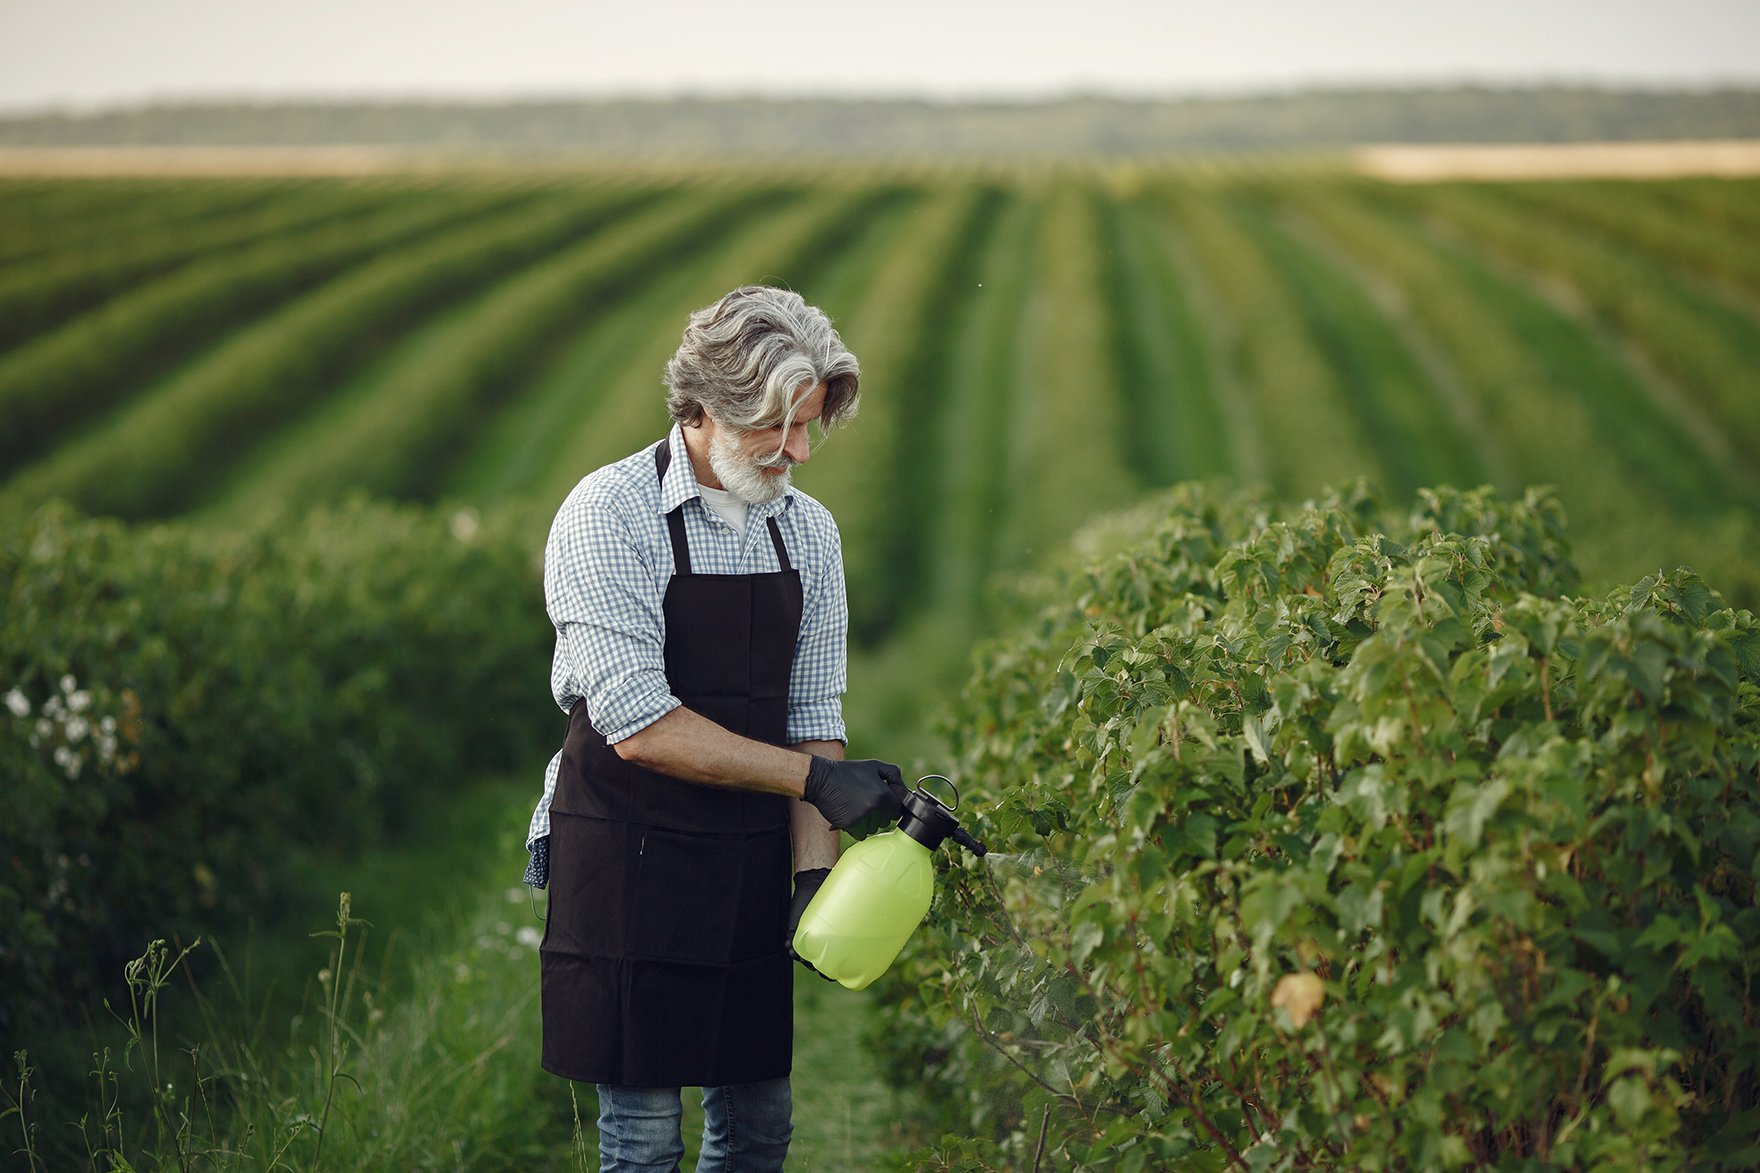 The European Integration Draft Law on Pesticides and Agrochemicals